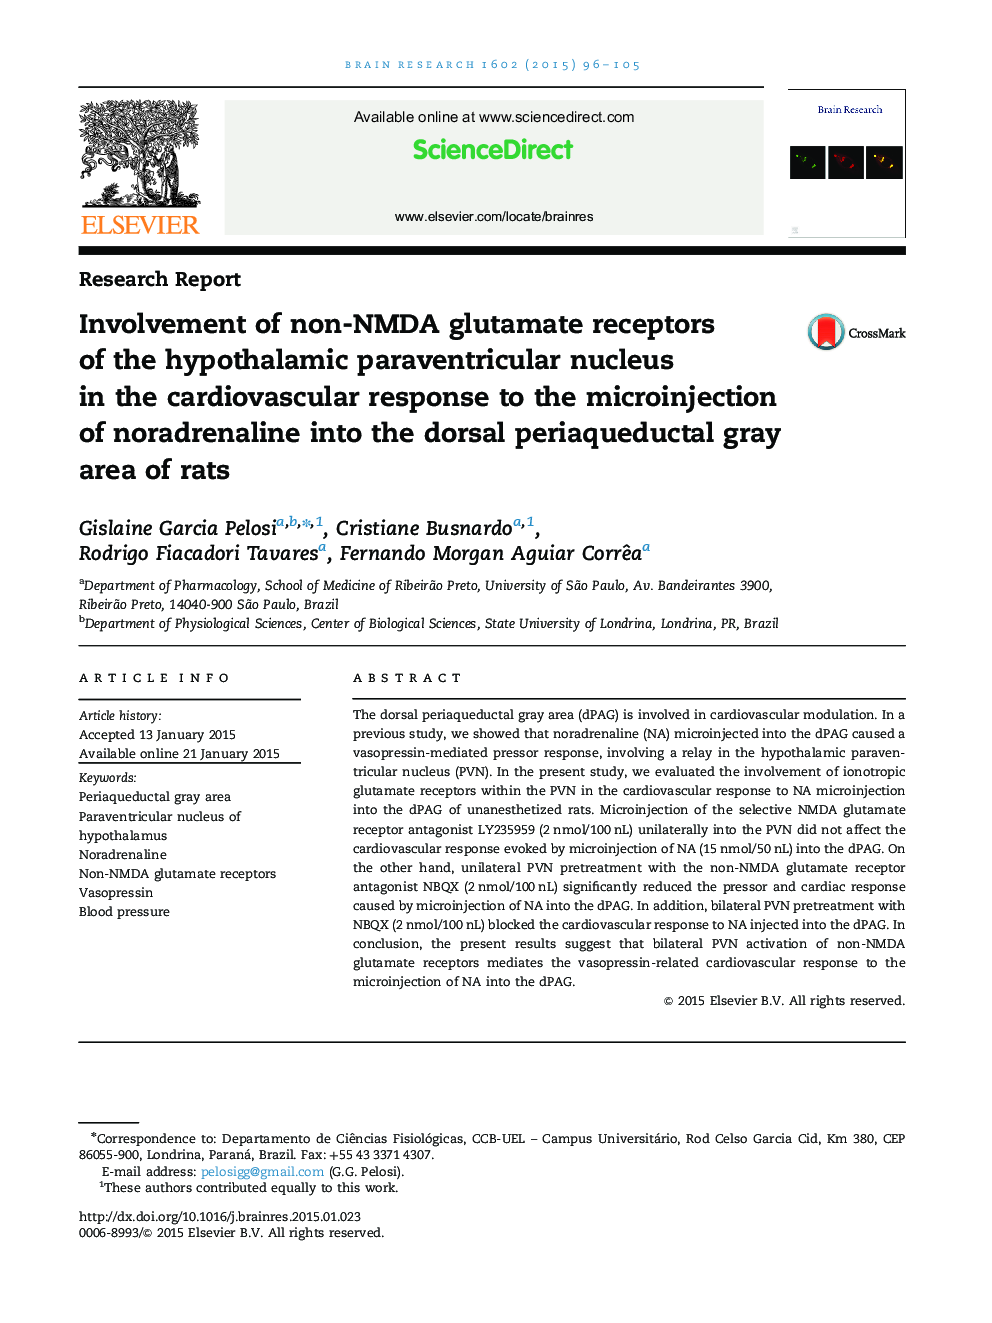 Involvement of non-NMDA glutamate receptors of the hypothalamic paraventricular nucleus in the cardiovascular response to the microinjection of noradrenaline into the dorsal periaqueductal gray area of rats